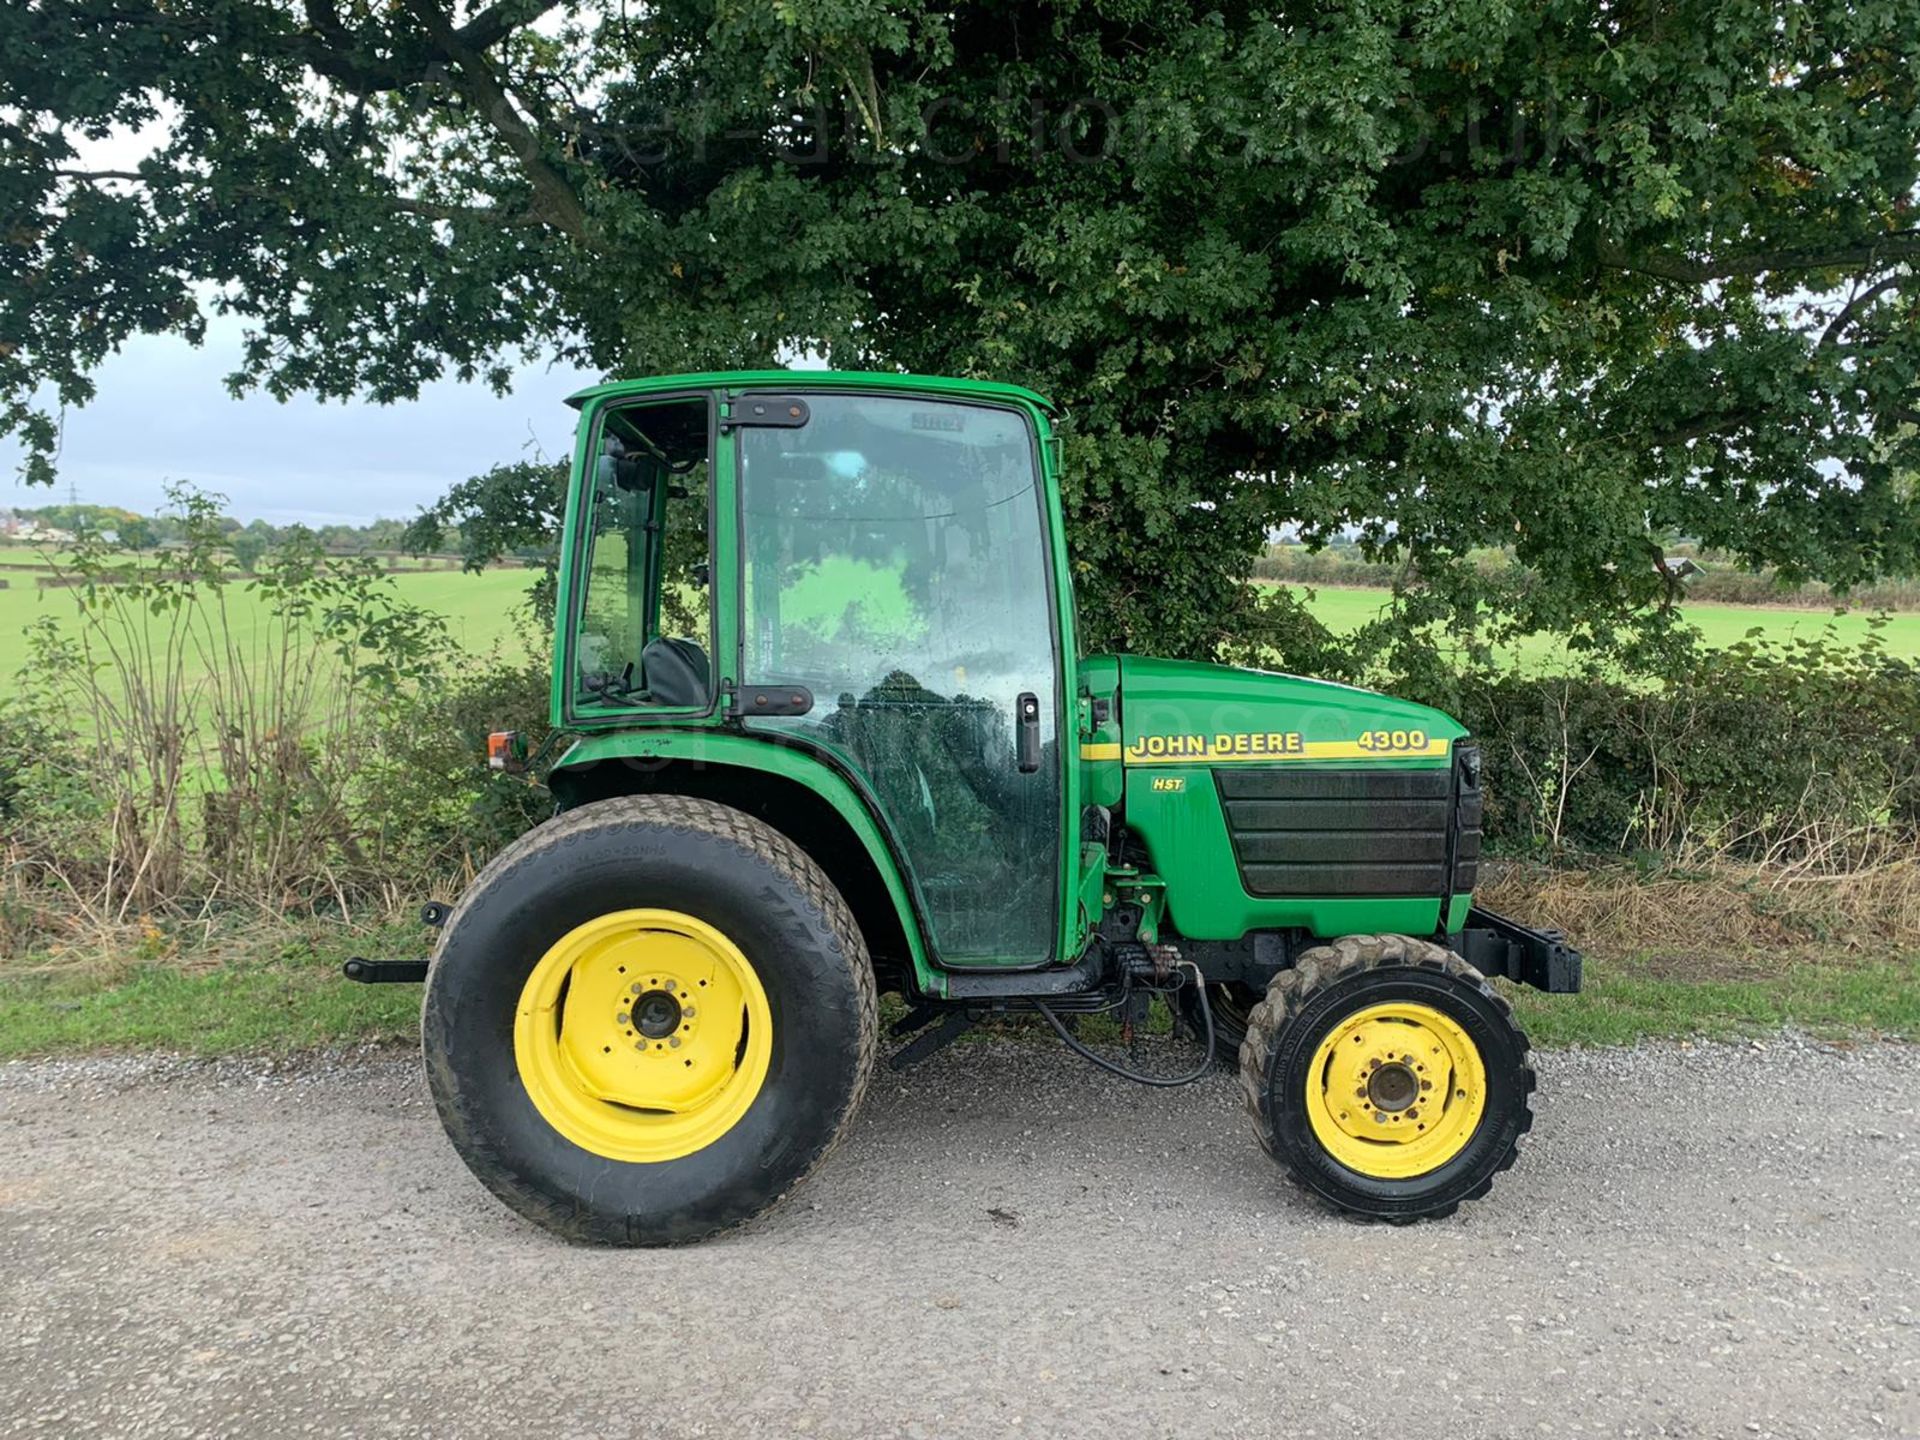 JOHN DEERE 4300 32hp 4WD COMPACT TRACTOR, RUNS DRIVES AND WORKS, CABBED, REAR TOW, ROAD KIT - Image 2 of 18